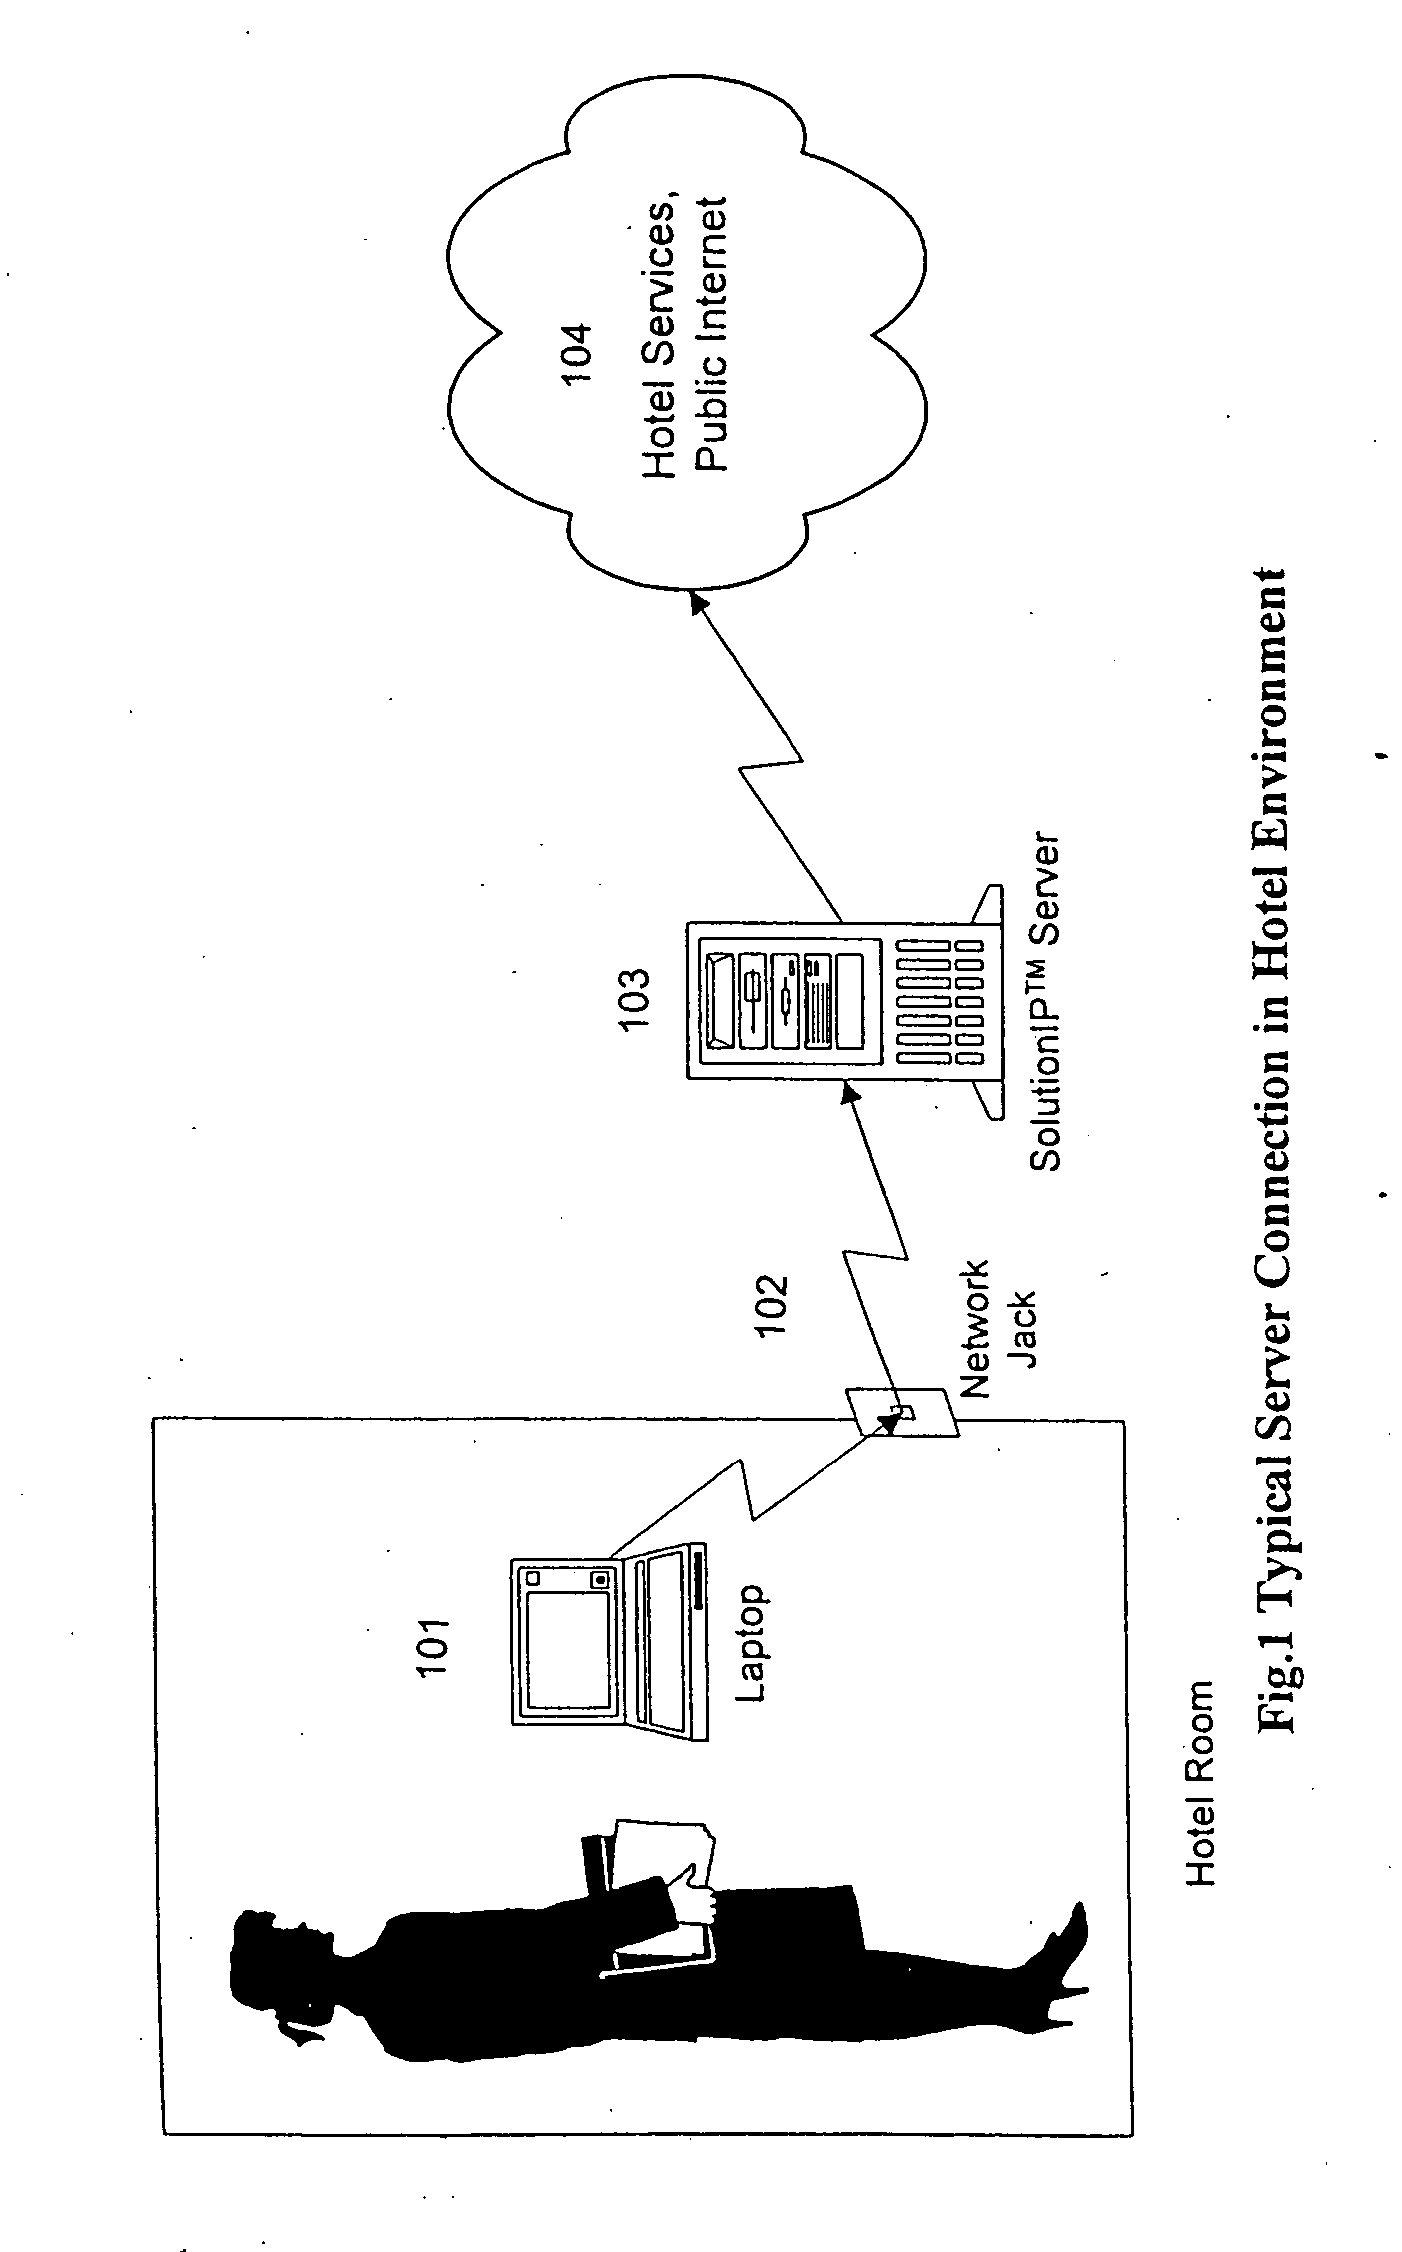 Server and method to provide access to a network by a computer configured for a different network